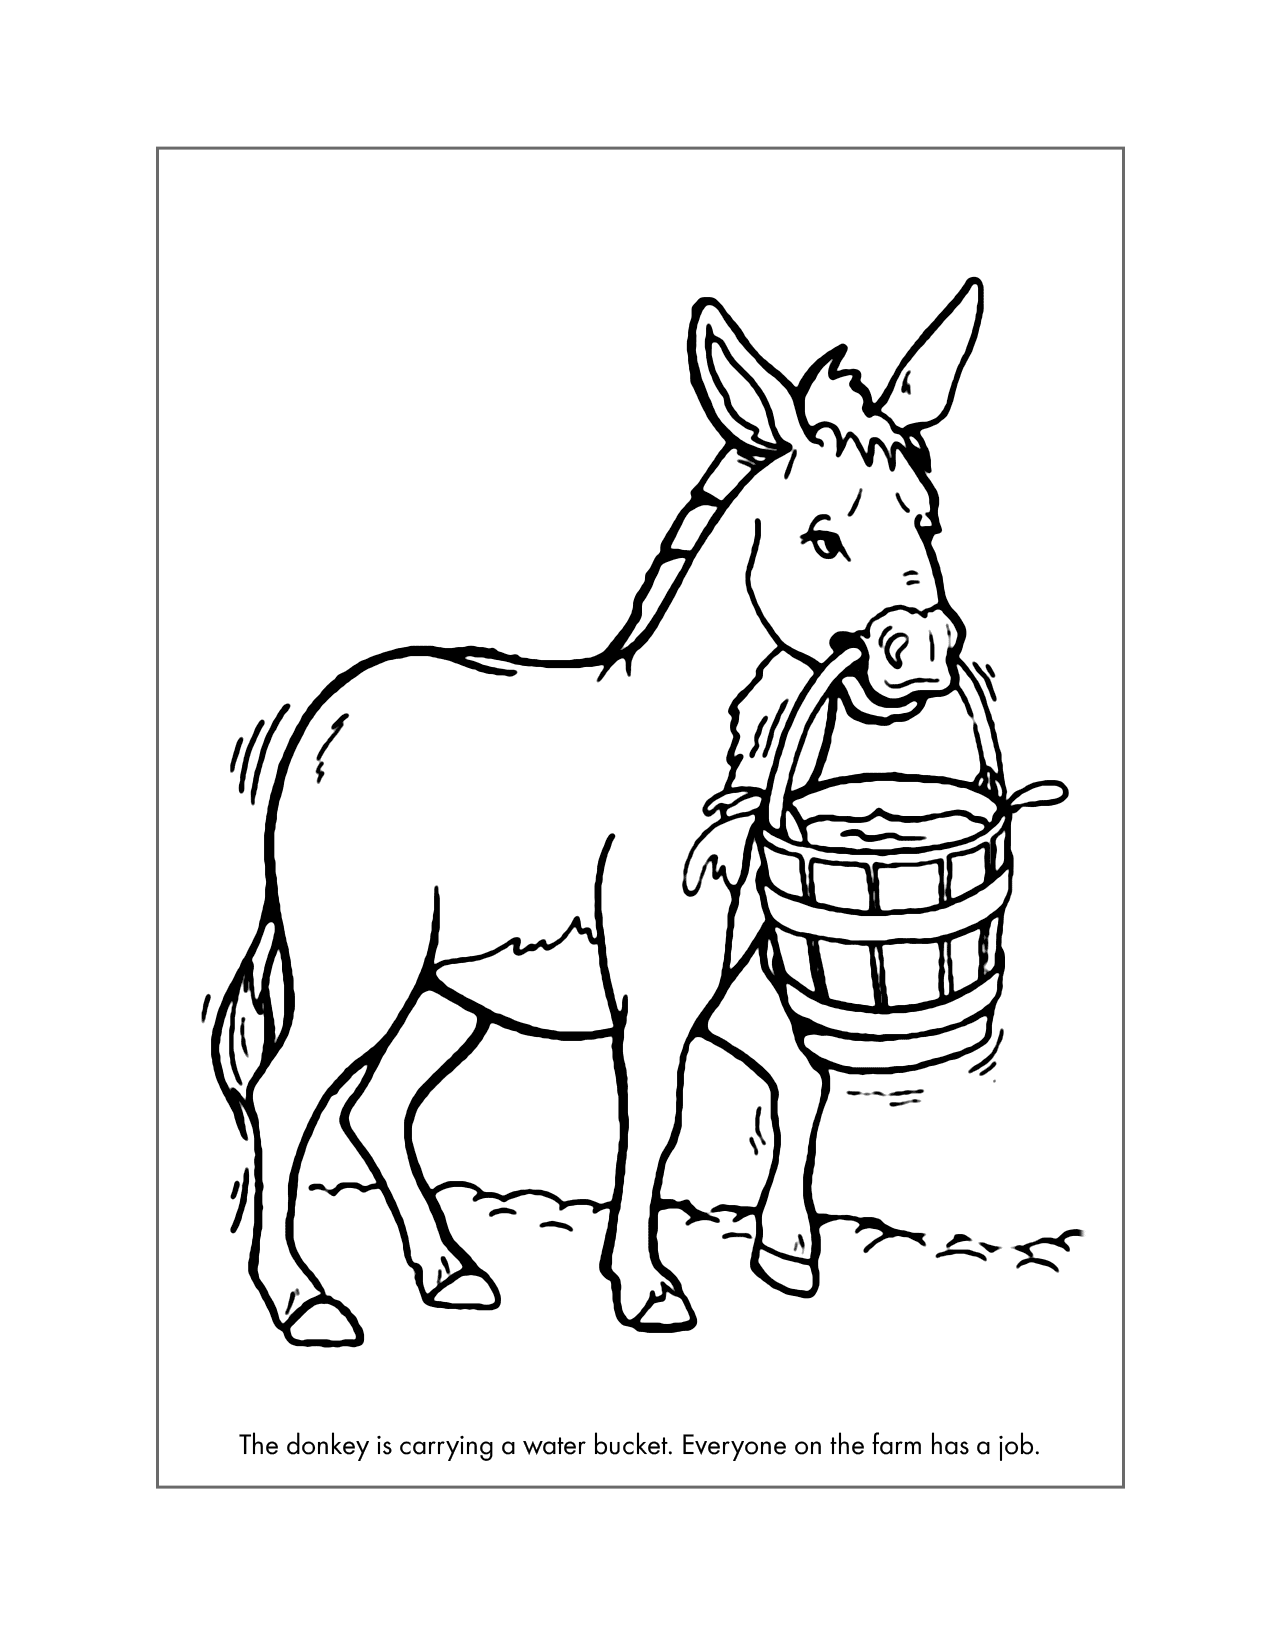 Donkey Carrying A Water Bucket Coloring Page